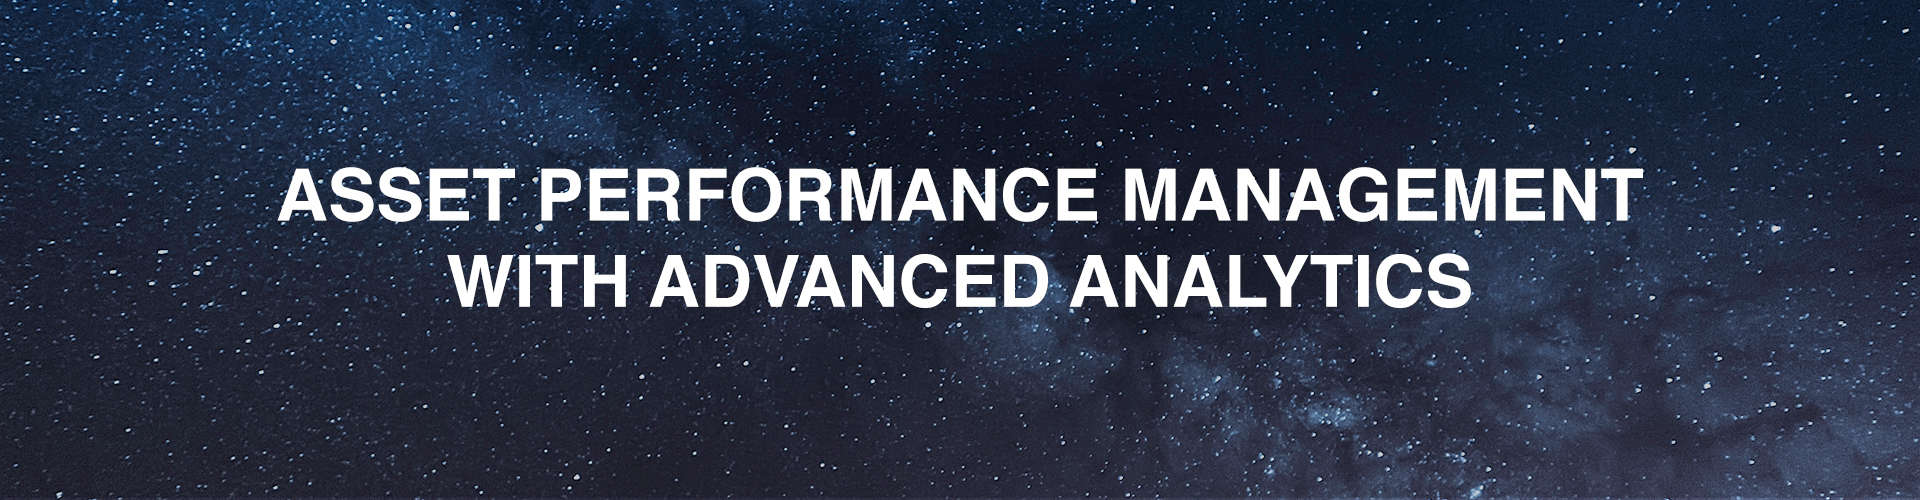 Asset Performance Management With Advanced Analytics (APM)